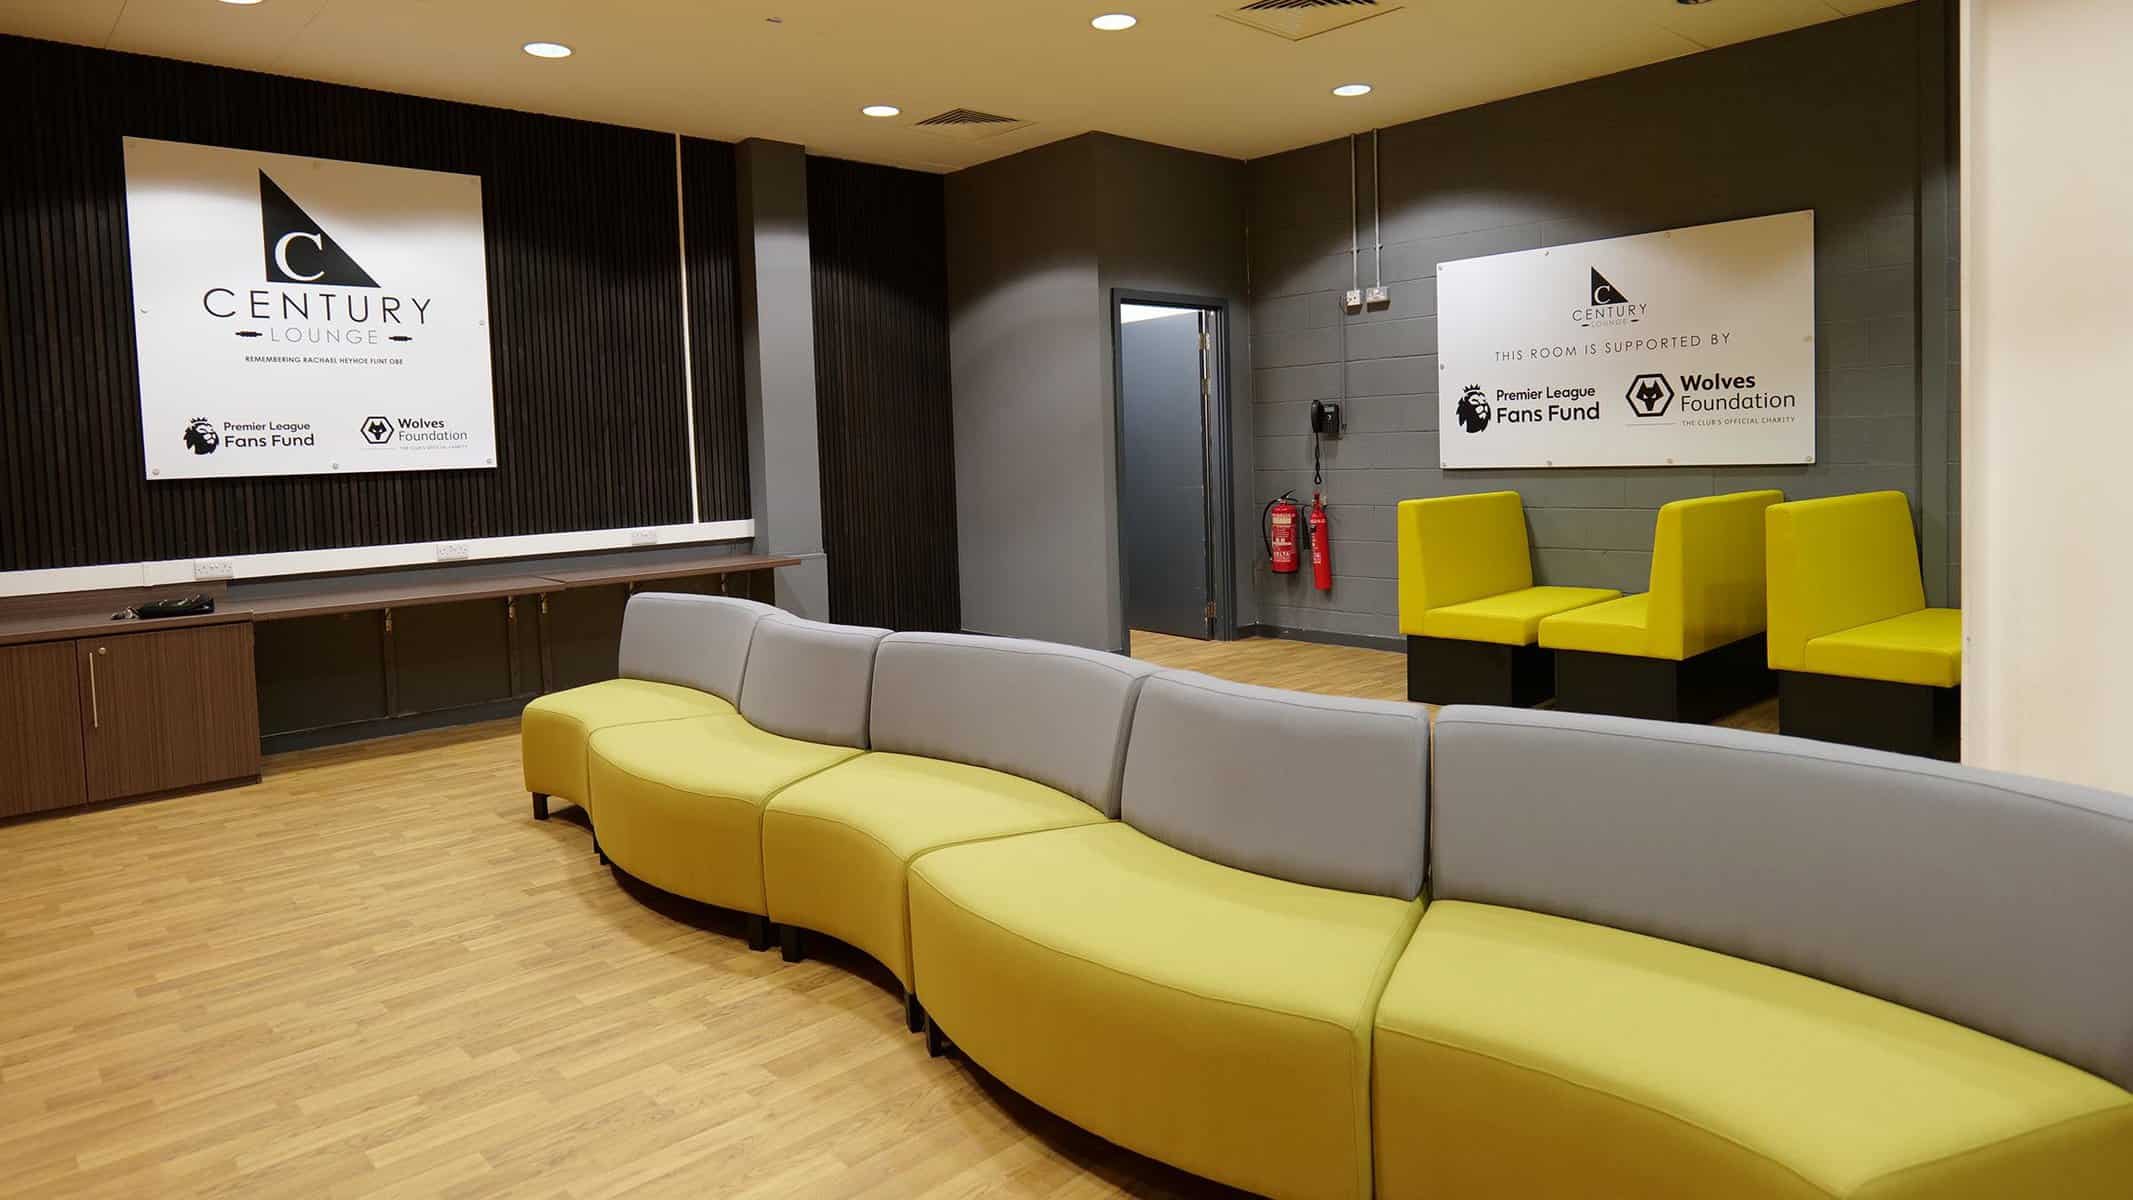 Foundation and Premier League Fans Fund revamp club’s accessible lounge Image